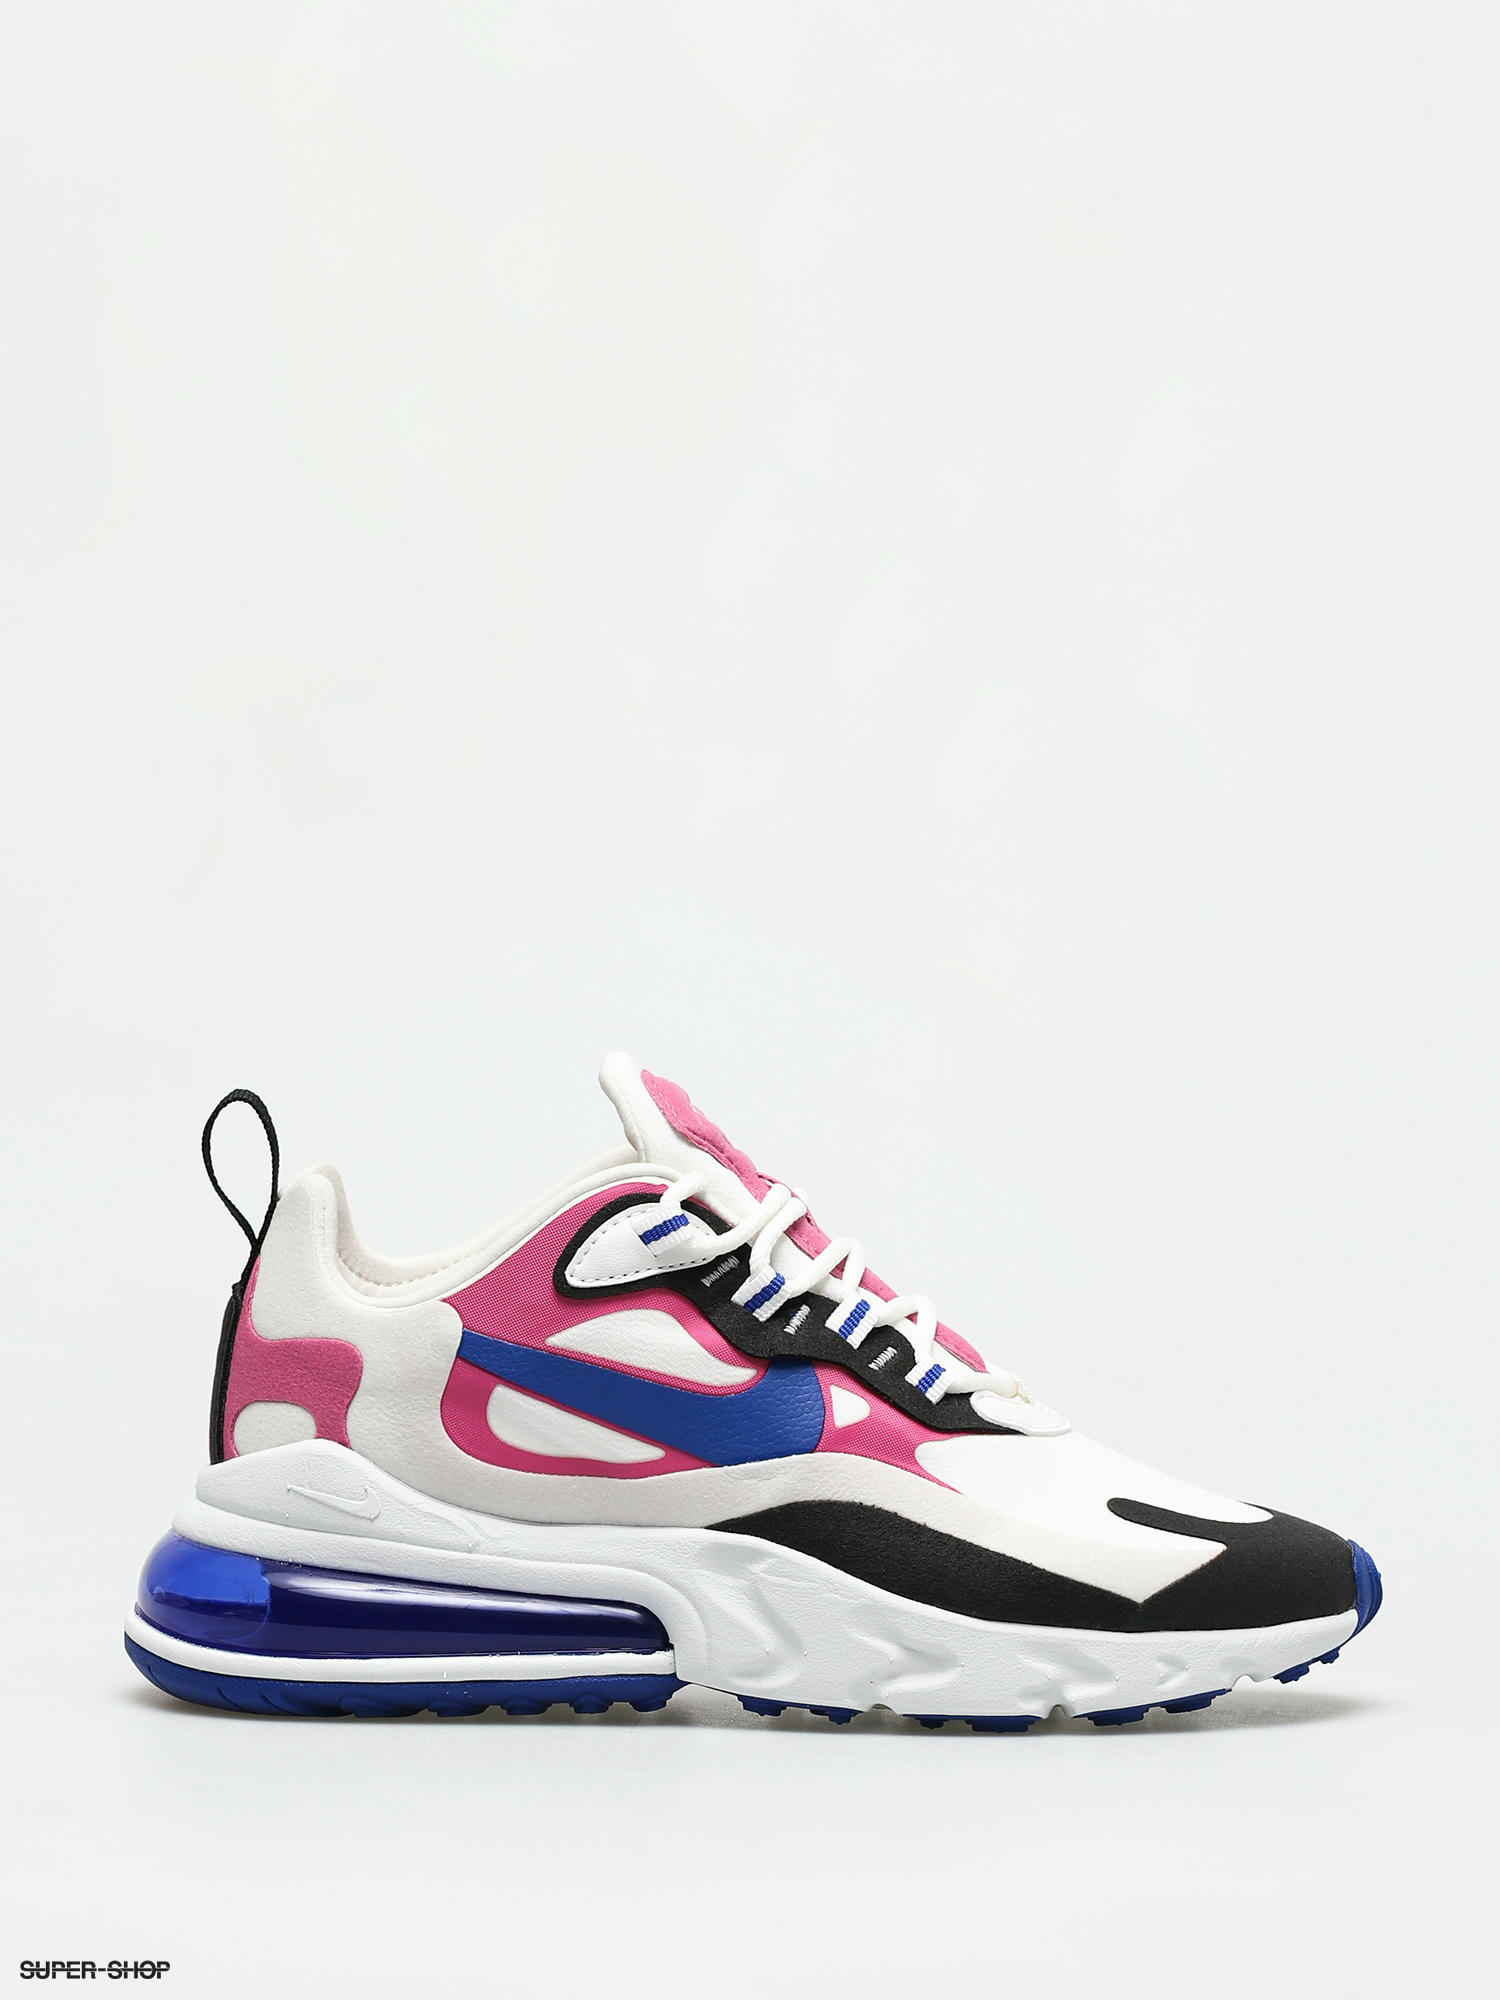 pink blue and white air max 270